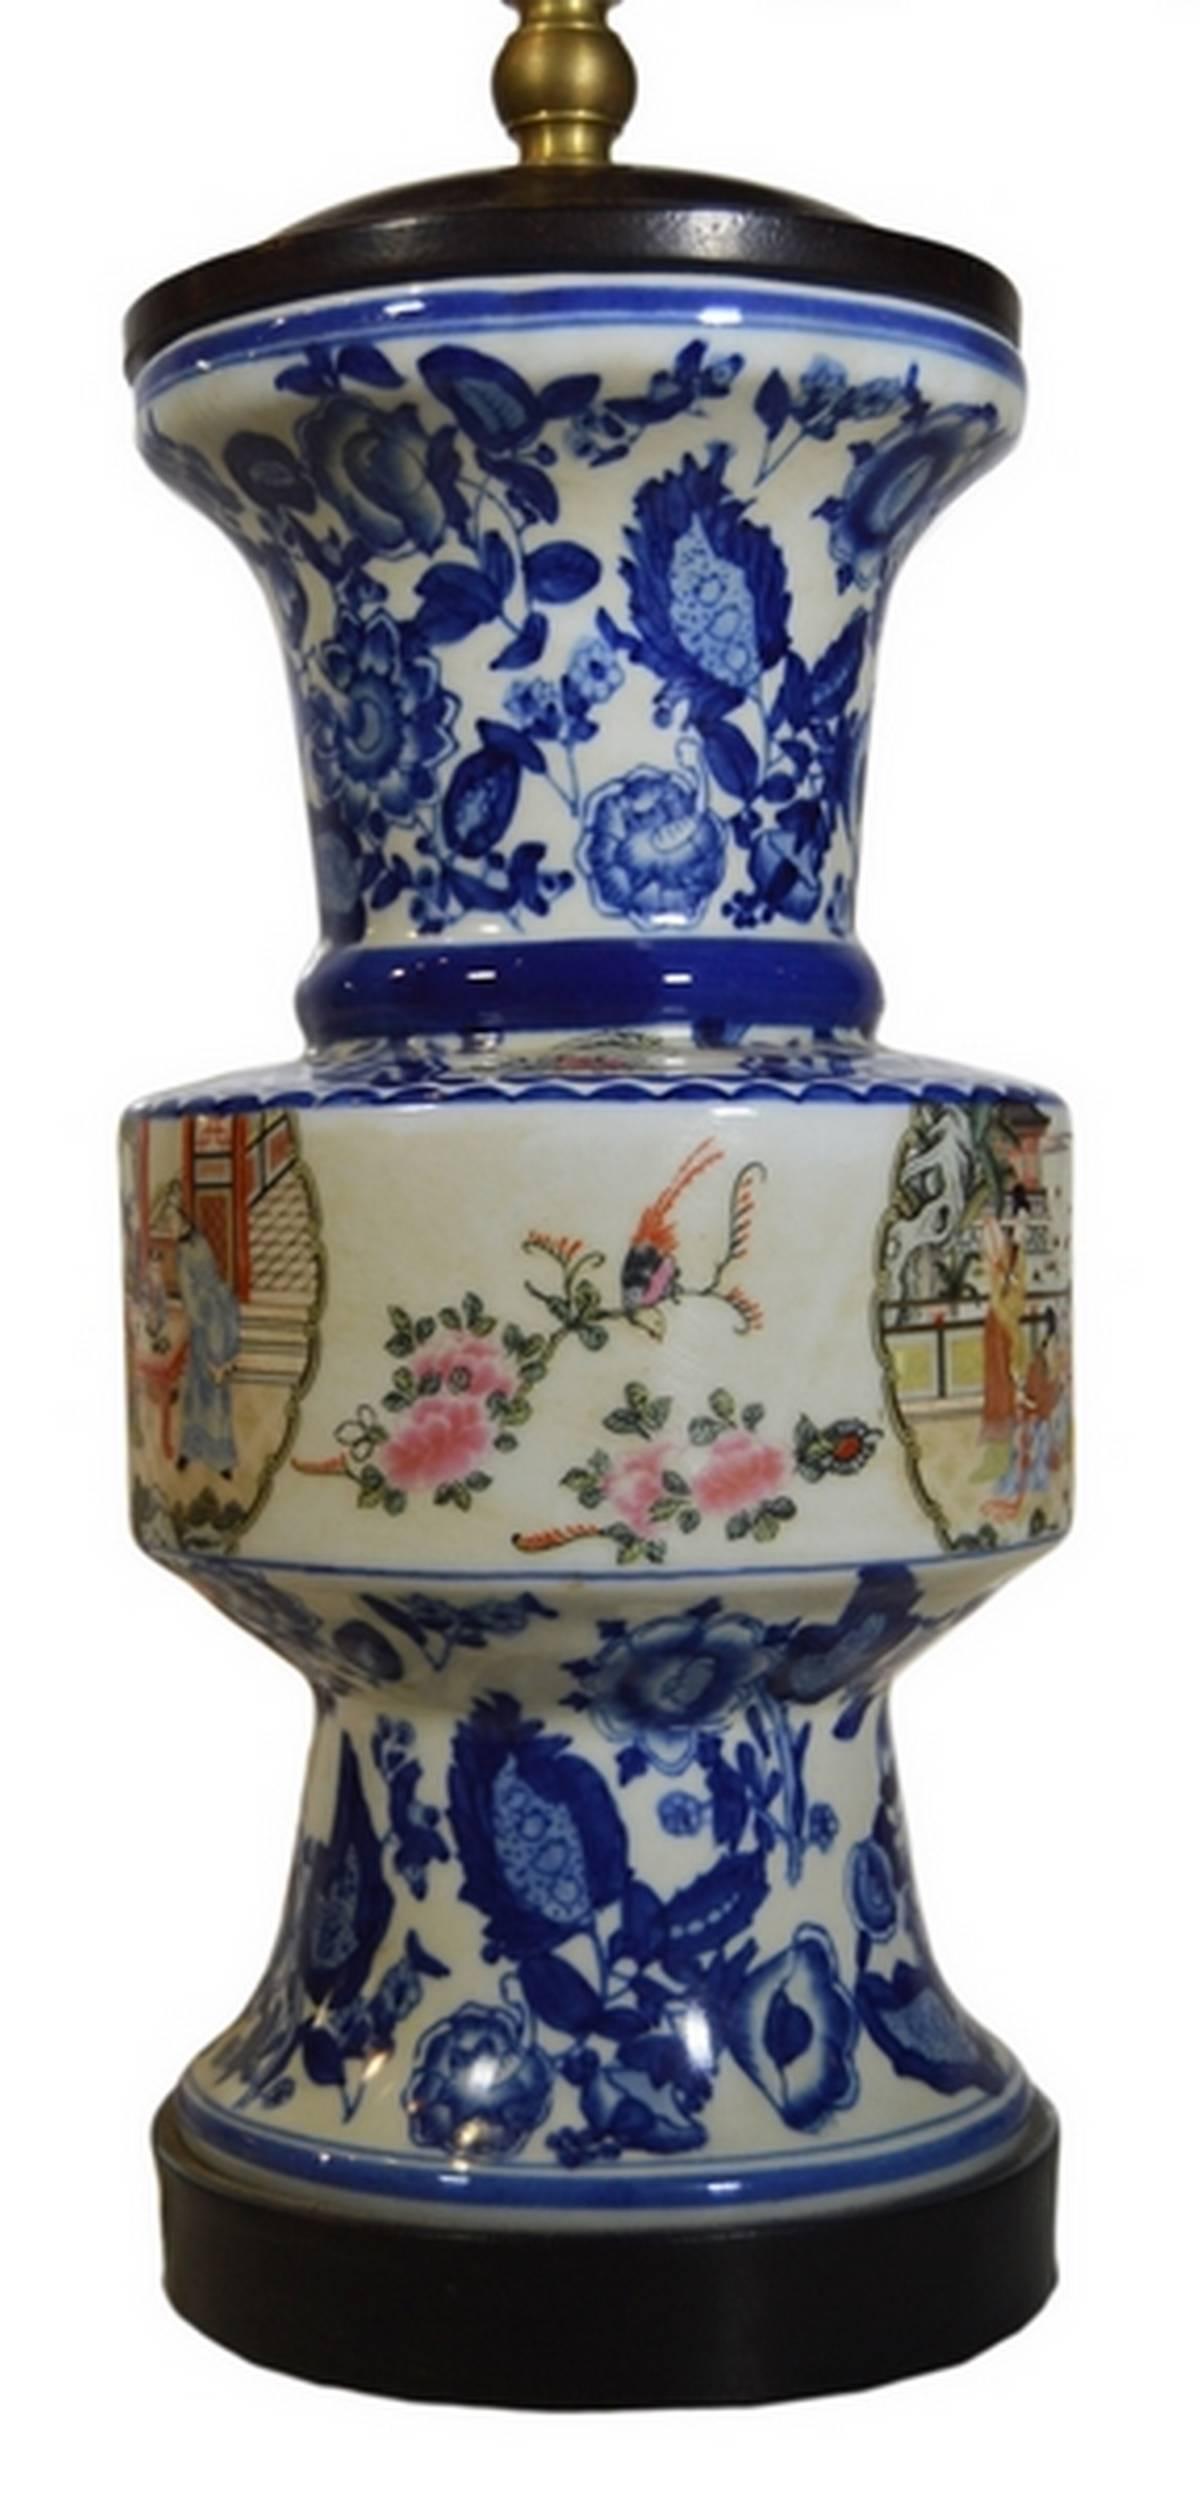 A Chinese 1970s vintage porcelain lamp with hand-painted characters. This tall lamp displays three sections. The middle section is cylindrical with a hand-painted Chinese palace scene depicting an emperor among his courtesans and women with fans.